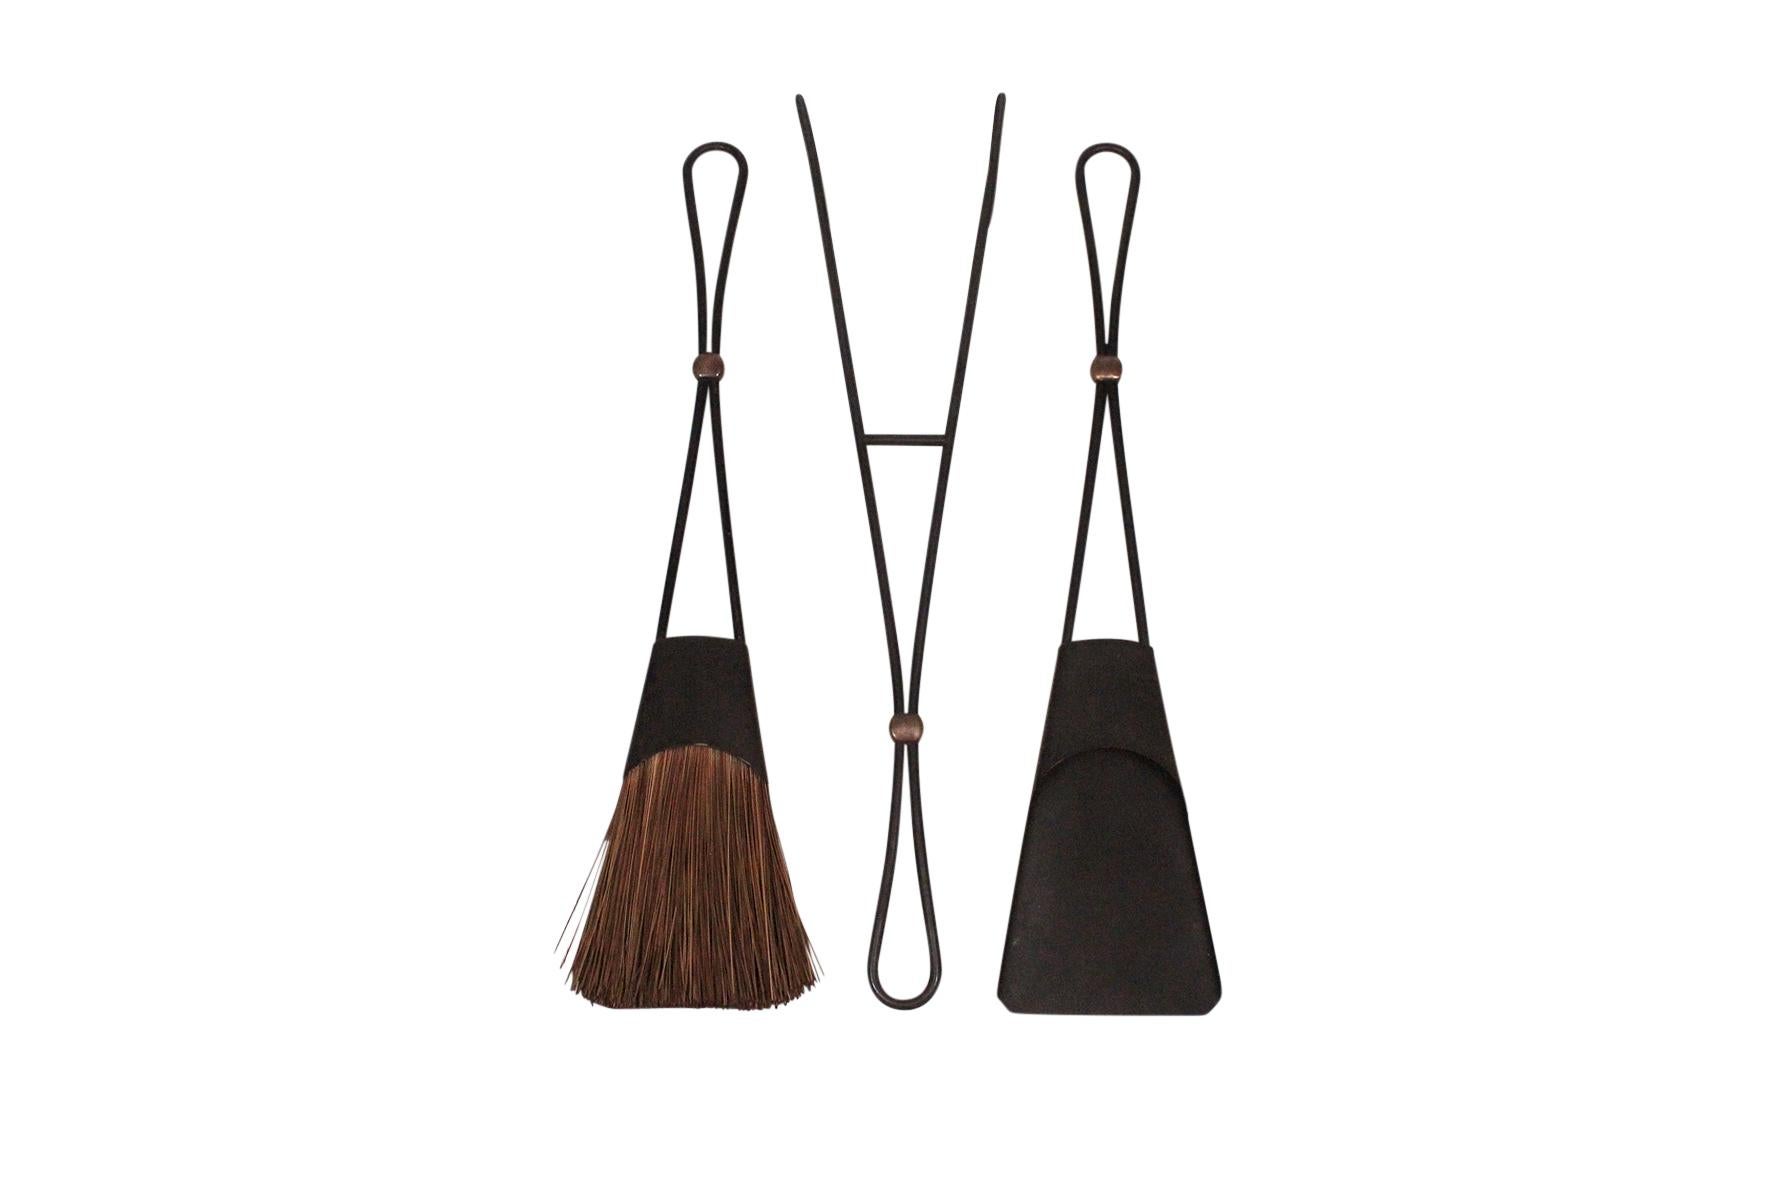 Set of 3 modernist fireplace tools with a wall-mounted rack by Jens Harald Quistgaard for Dansk. Denmark, 1950s.